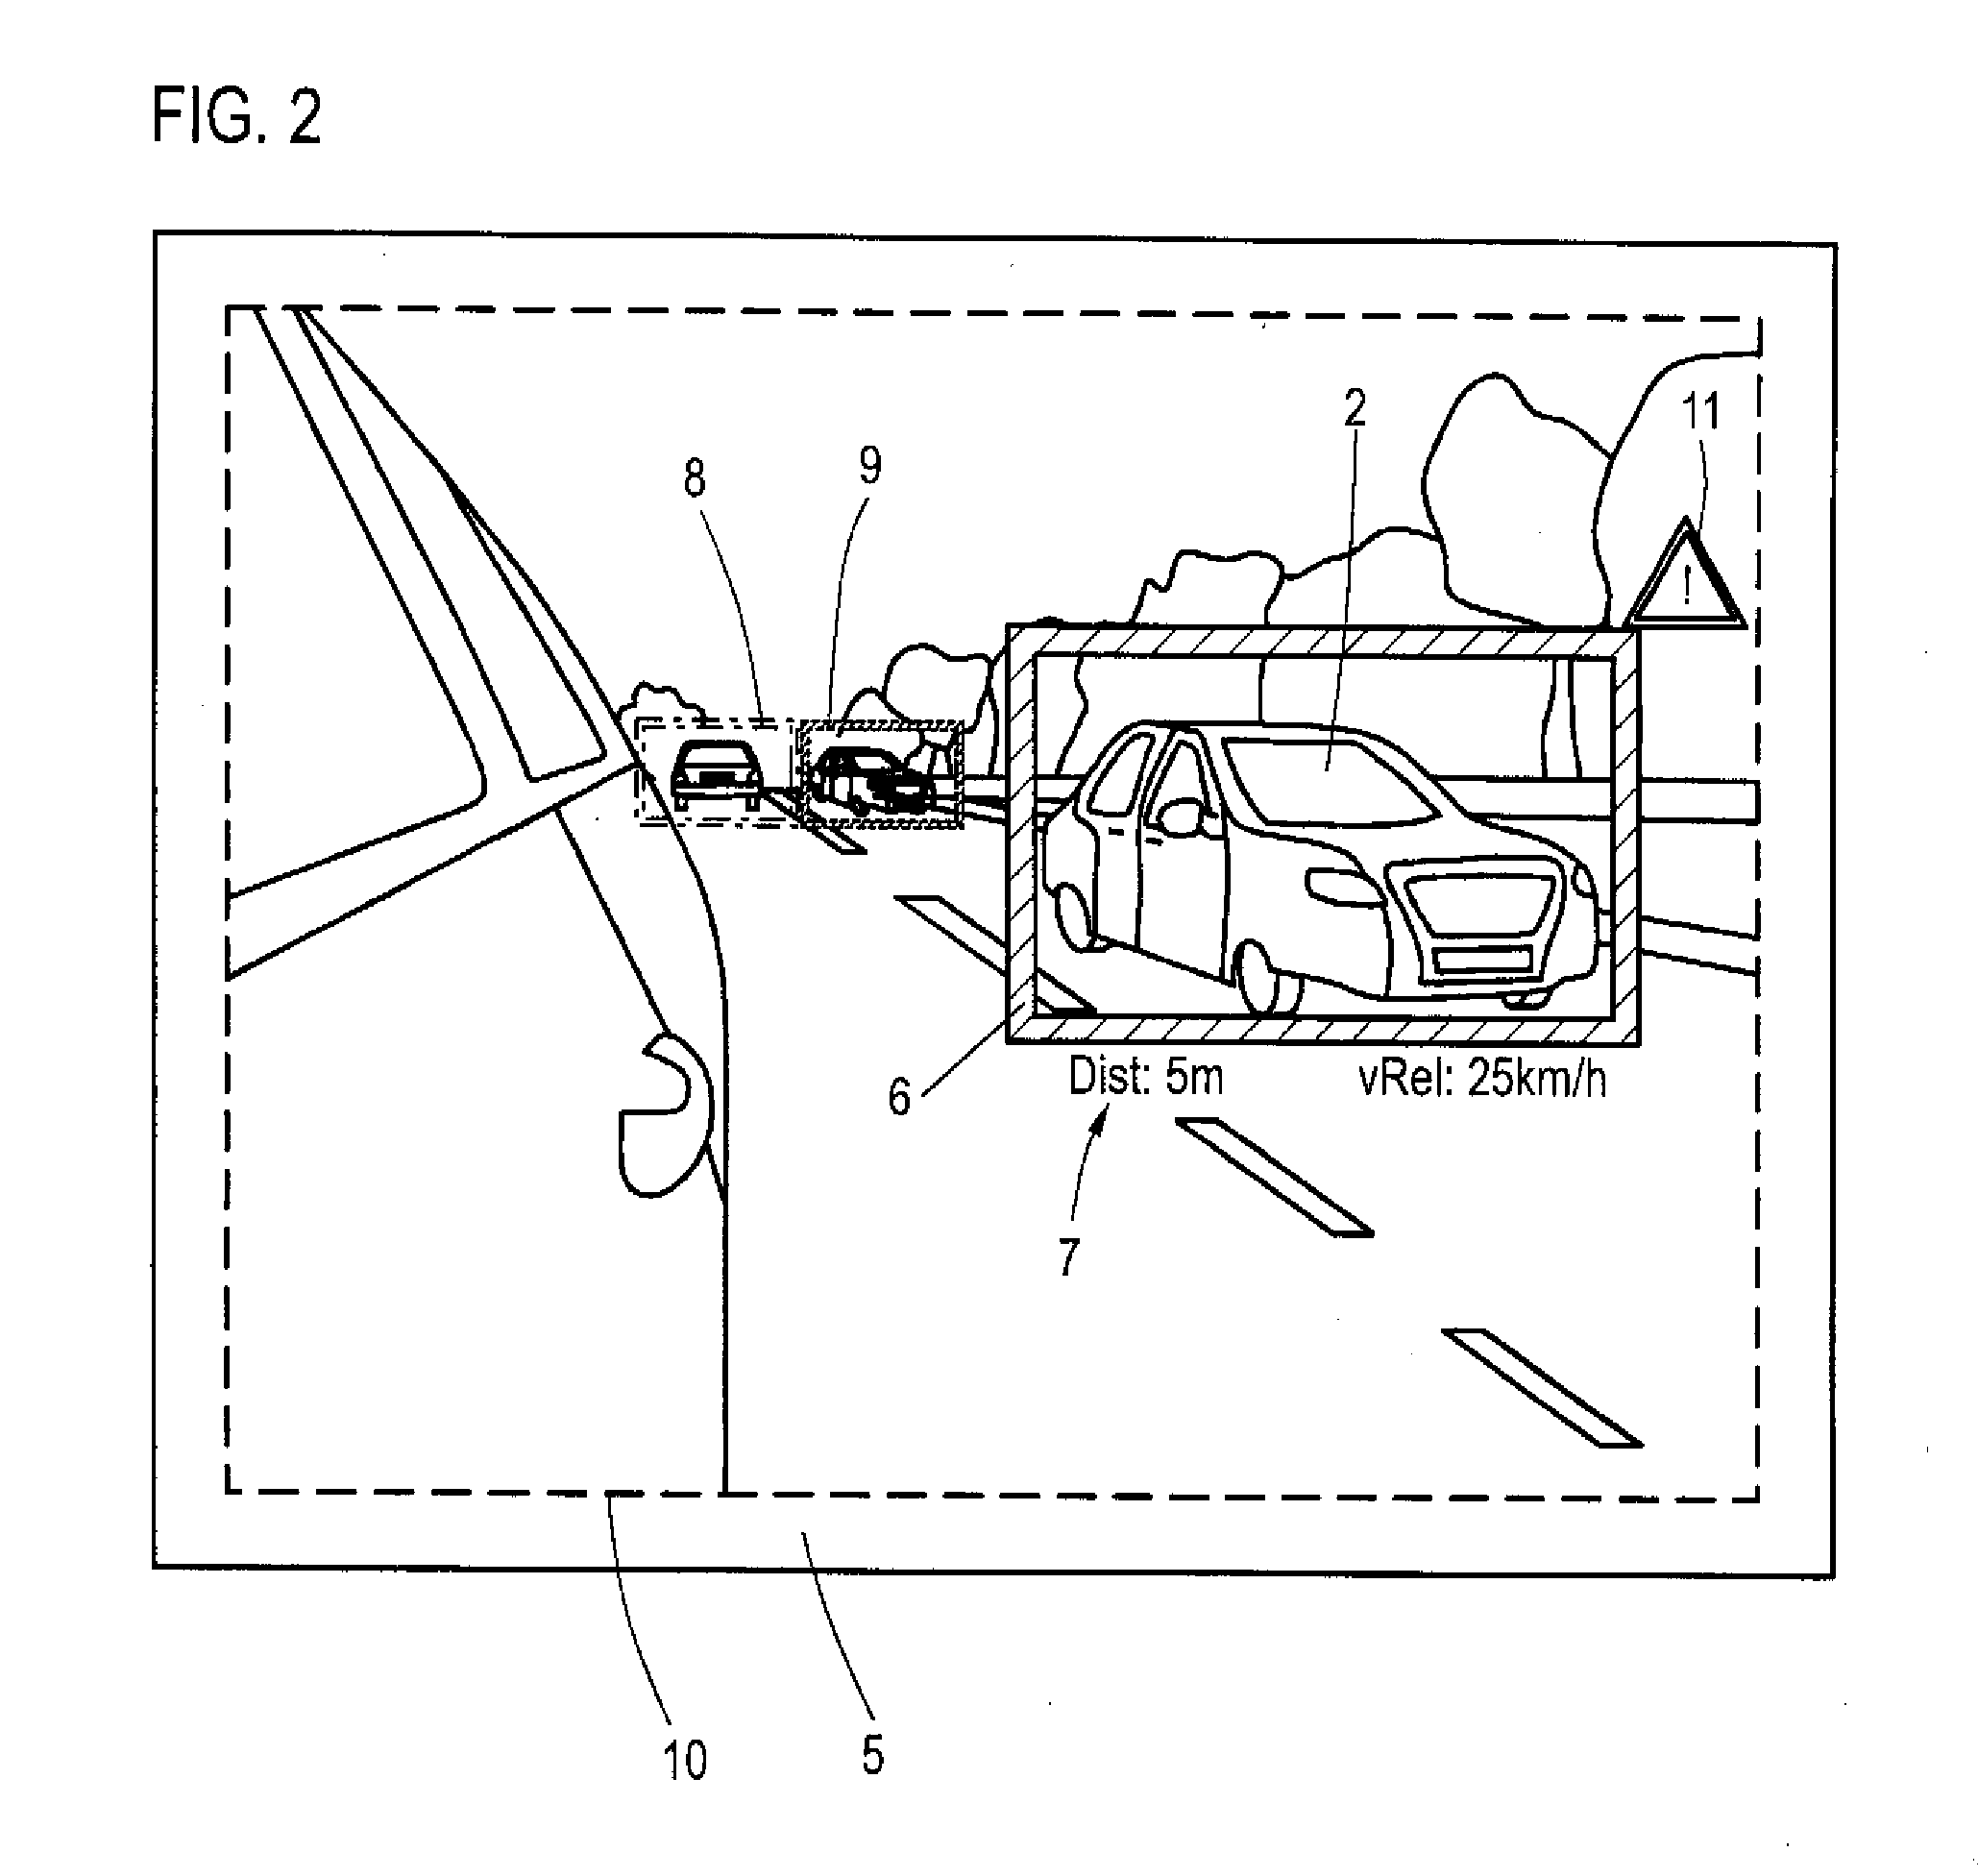 Method for visualizing the vicinity of a motor vehicle